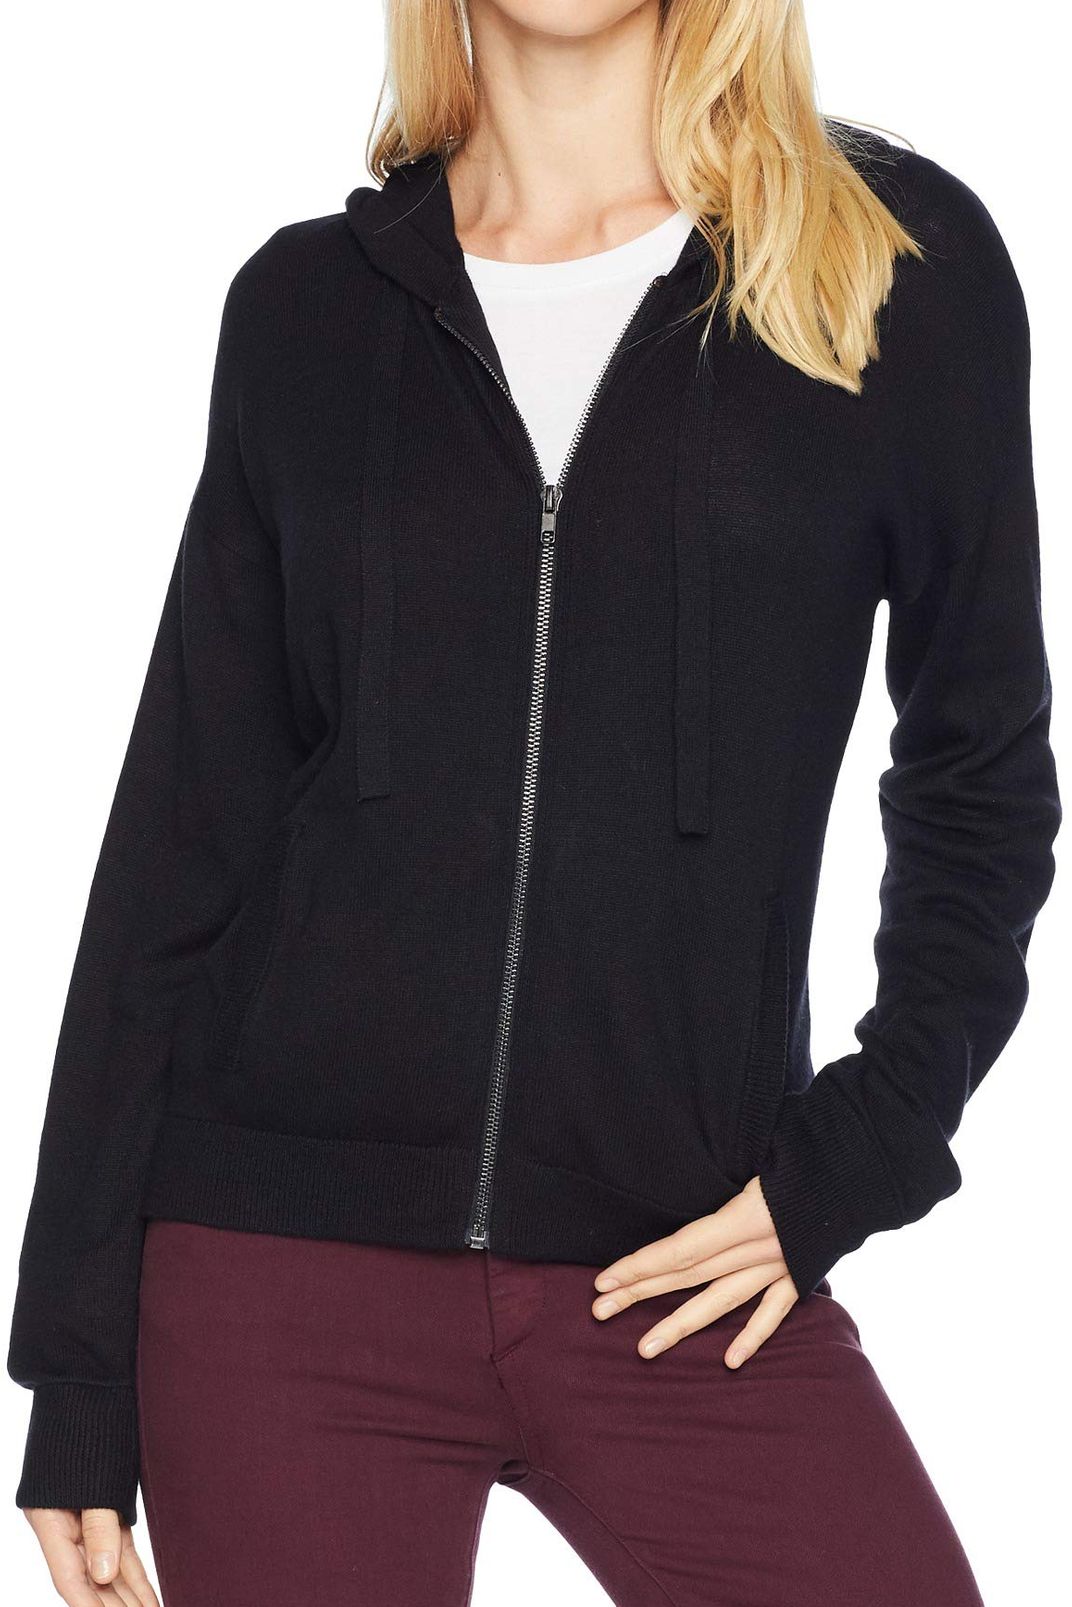 Where Can I Find a Petite Cashmere Hoodie? | The Strategist